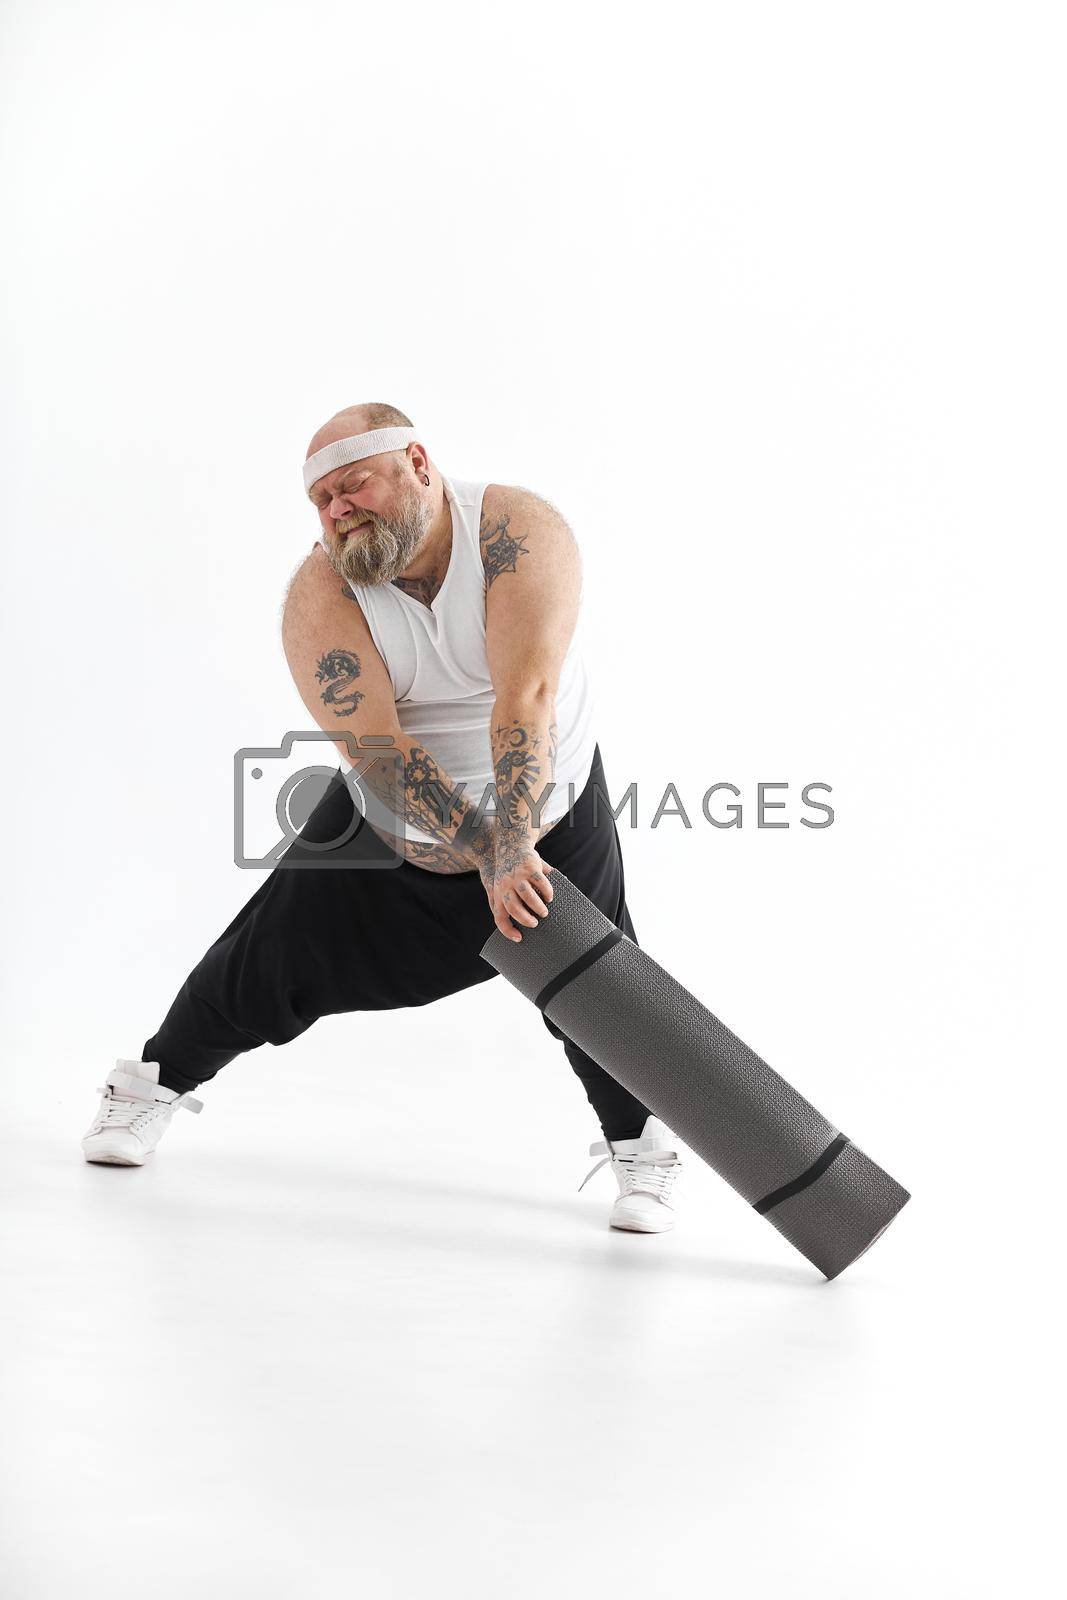 Royalty free image of Happy fat man with big belly and tattos in sports wear with exercise mat by Yaroslav_astakhov